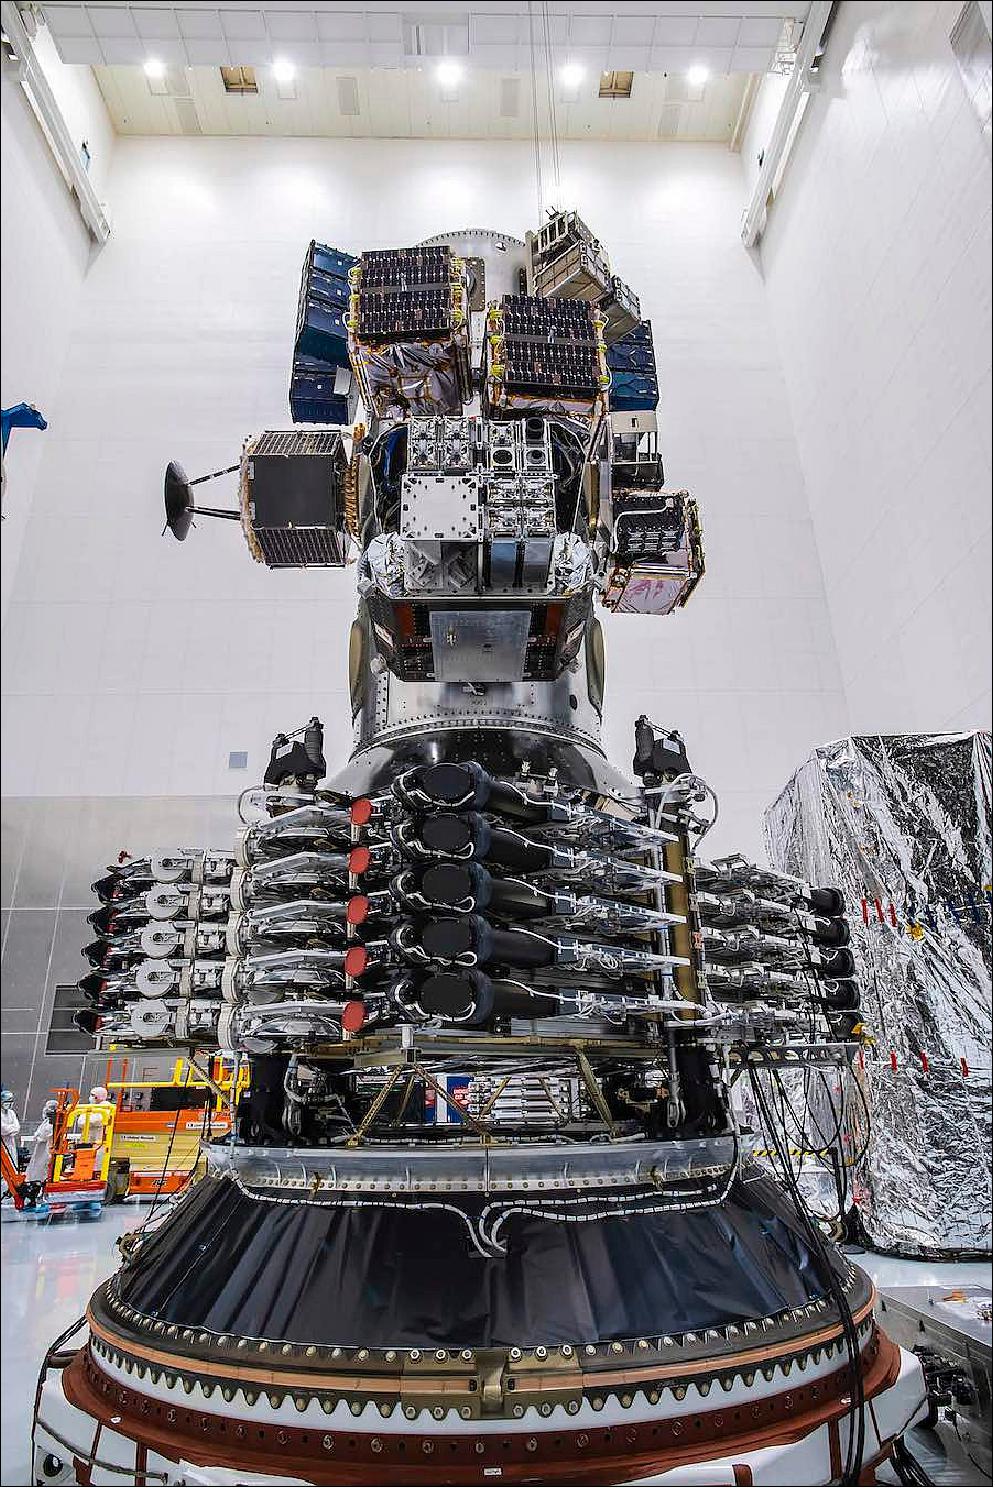 Figure 2: This photo shows the stack of 143 small satellites aboard SpaceX's Transporter-1 mission before encapsulation inside the Falcon 9 rocket's payload shroud (image credit: SpaceX)